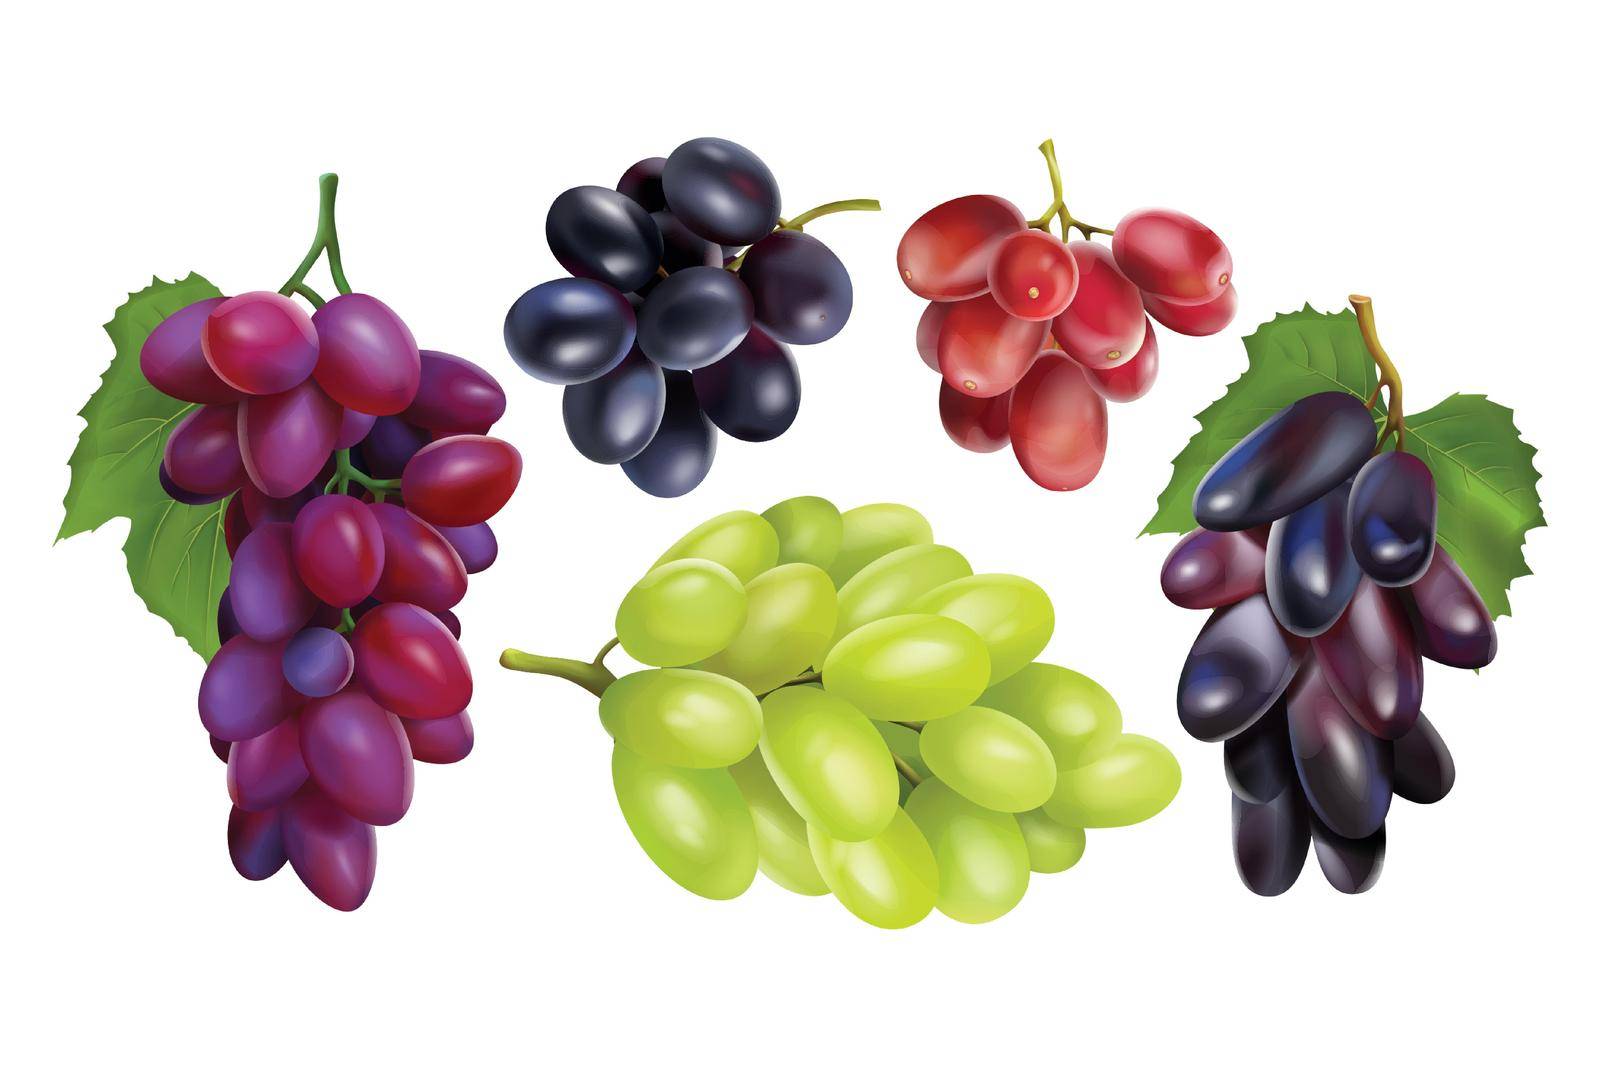 Realisitc grapes set. Collection of realism style drawn 3d miscellaneous branches of green blue table grape wine autumn plants fresh fruits isolated on white background. Vine food berry objects icons.